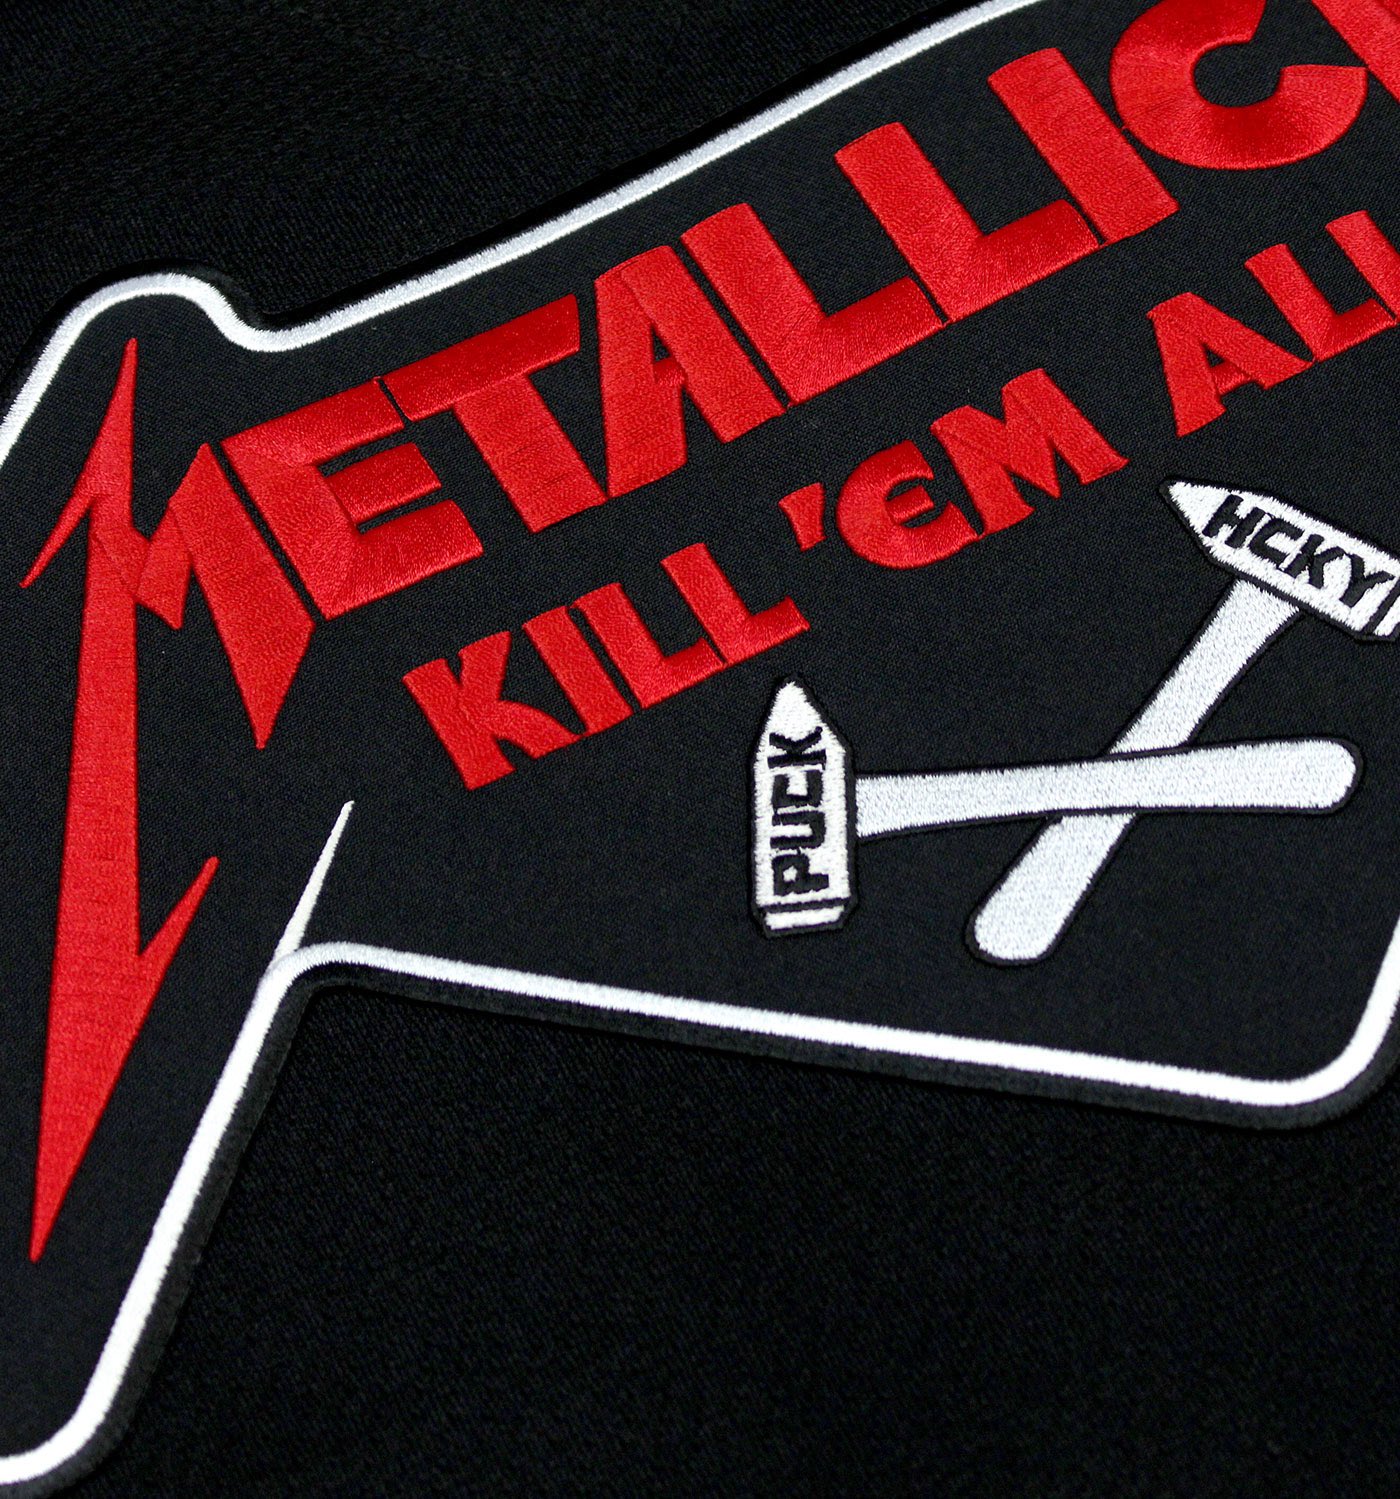 PUCK HCKY on X: The ultimate classic- our @Metallica 'KILL EM ALL CROSSED  HAMMERS' deluxe hockey jersey, snag it while ya can 🤘 #metallica  #killemall #puckhcky #allthingshockey  / X